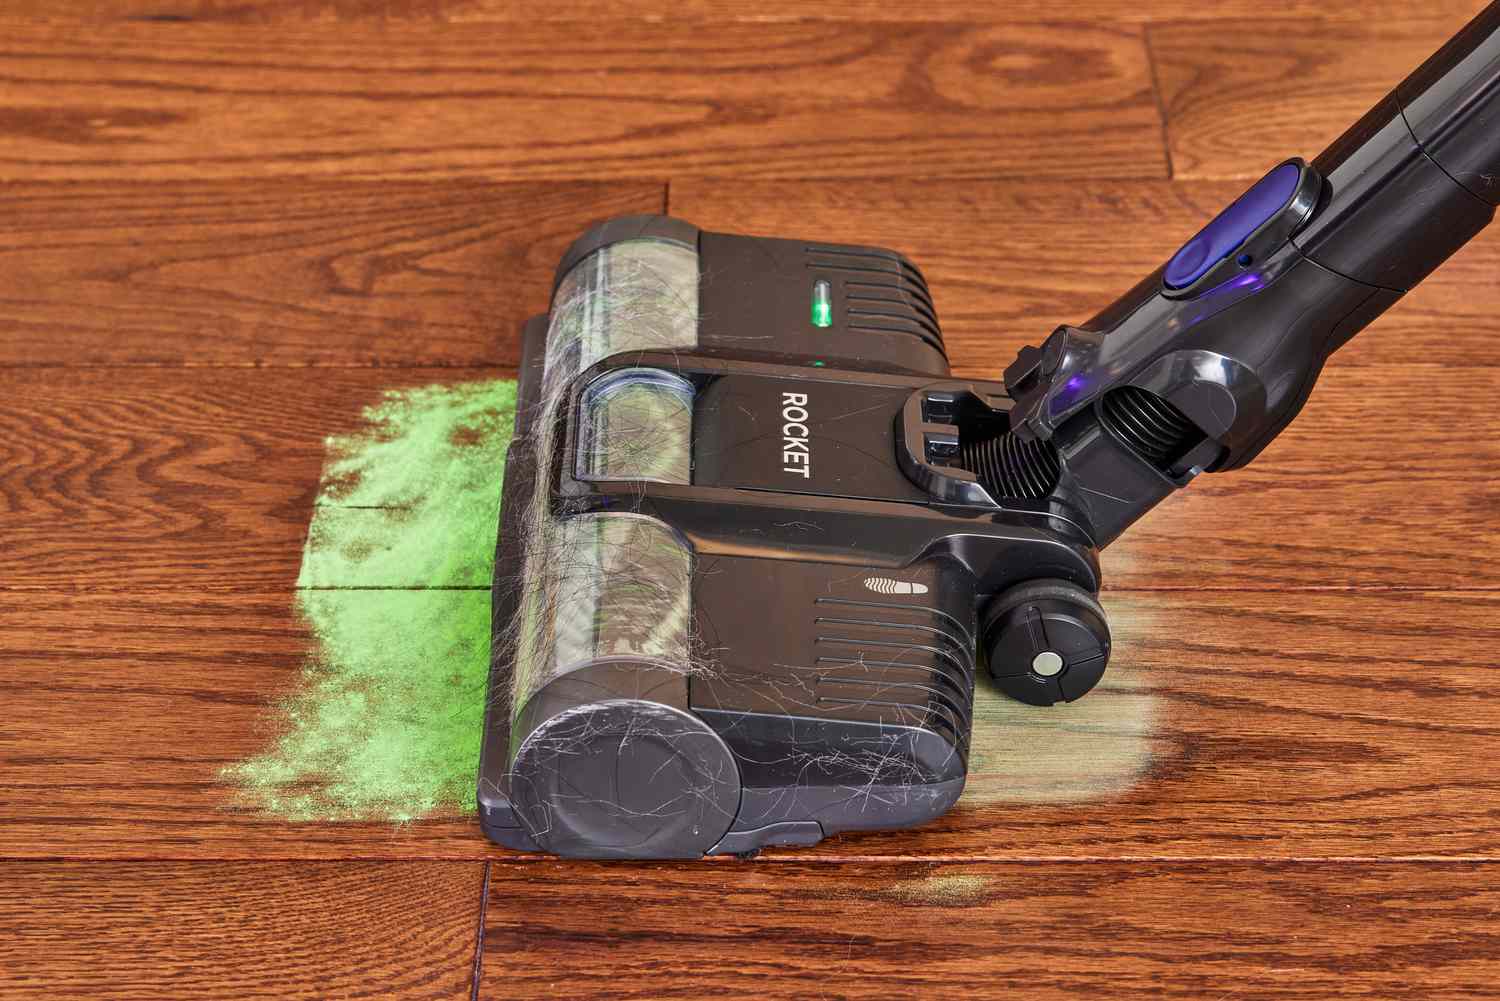 A Shark Pet Cordless Stick Vacuum with XL Dust Cup cleaning a wooden floor filled with green powder